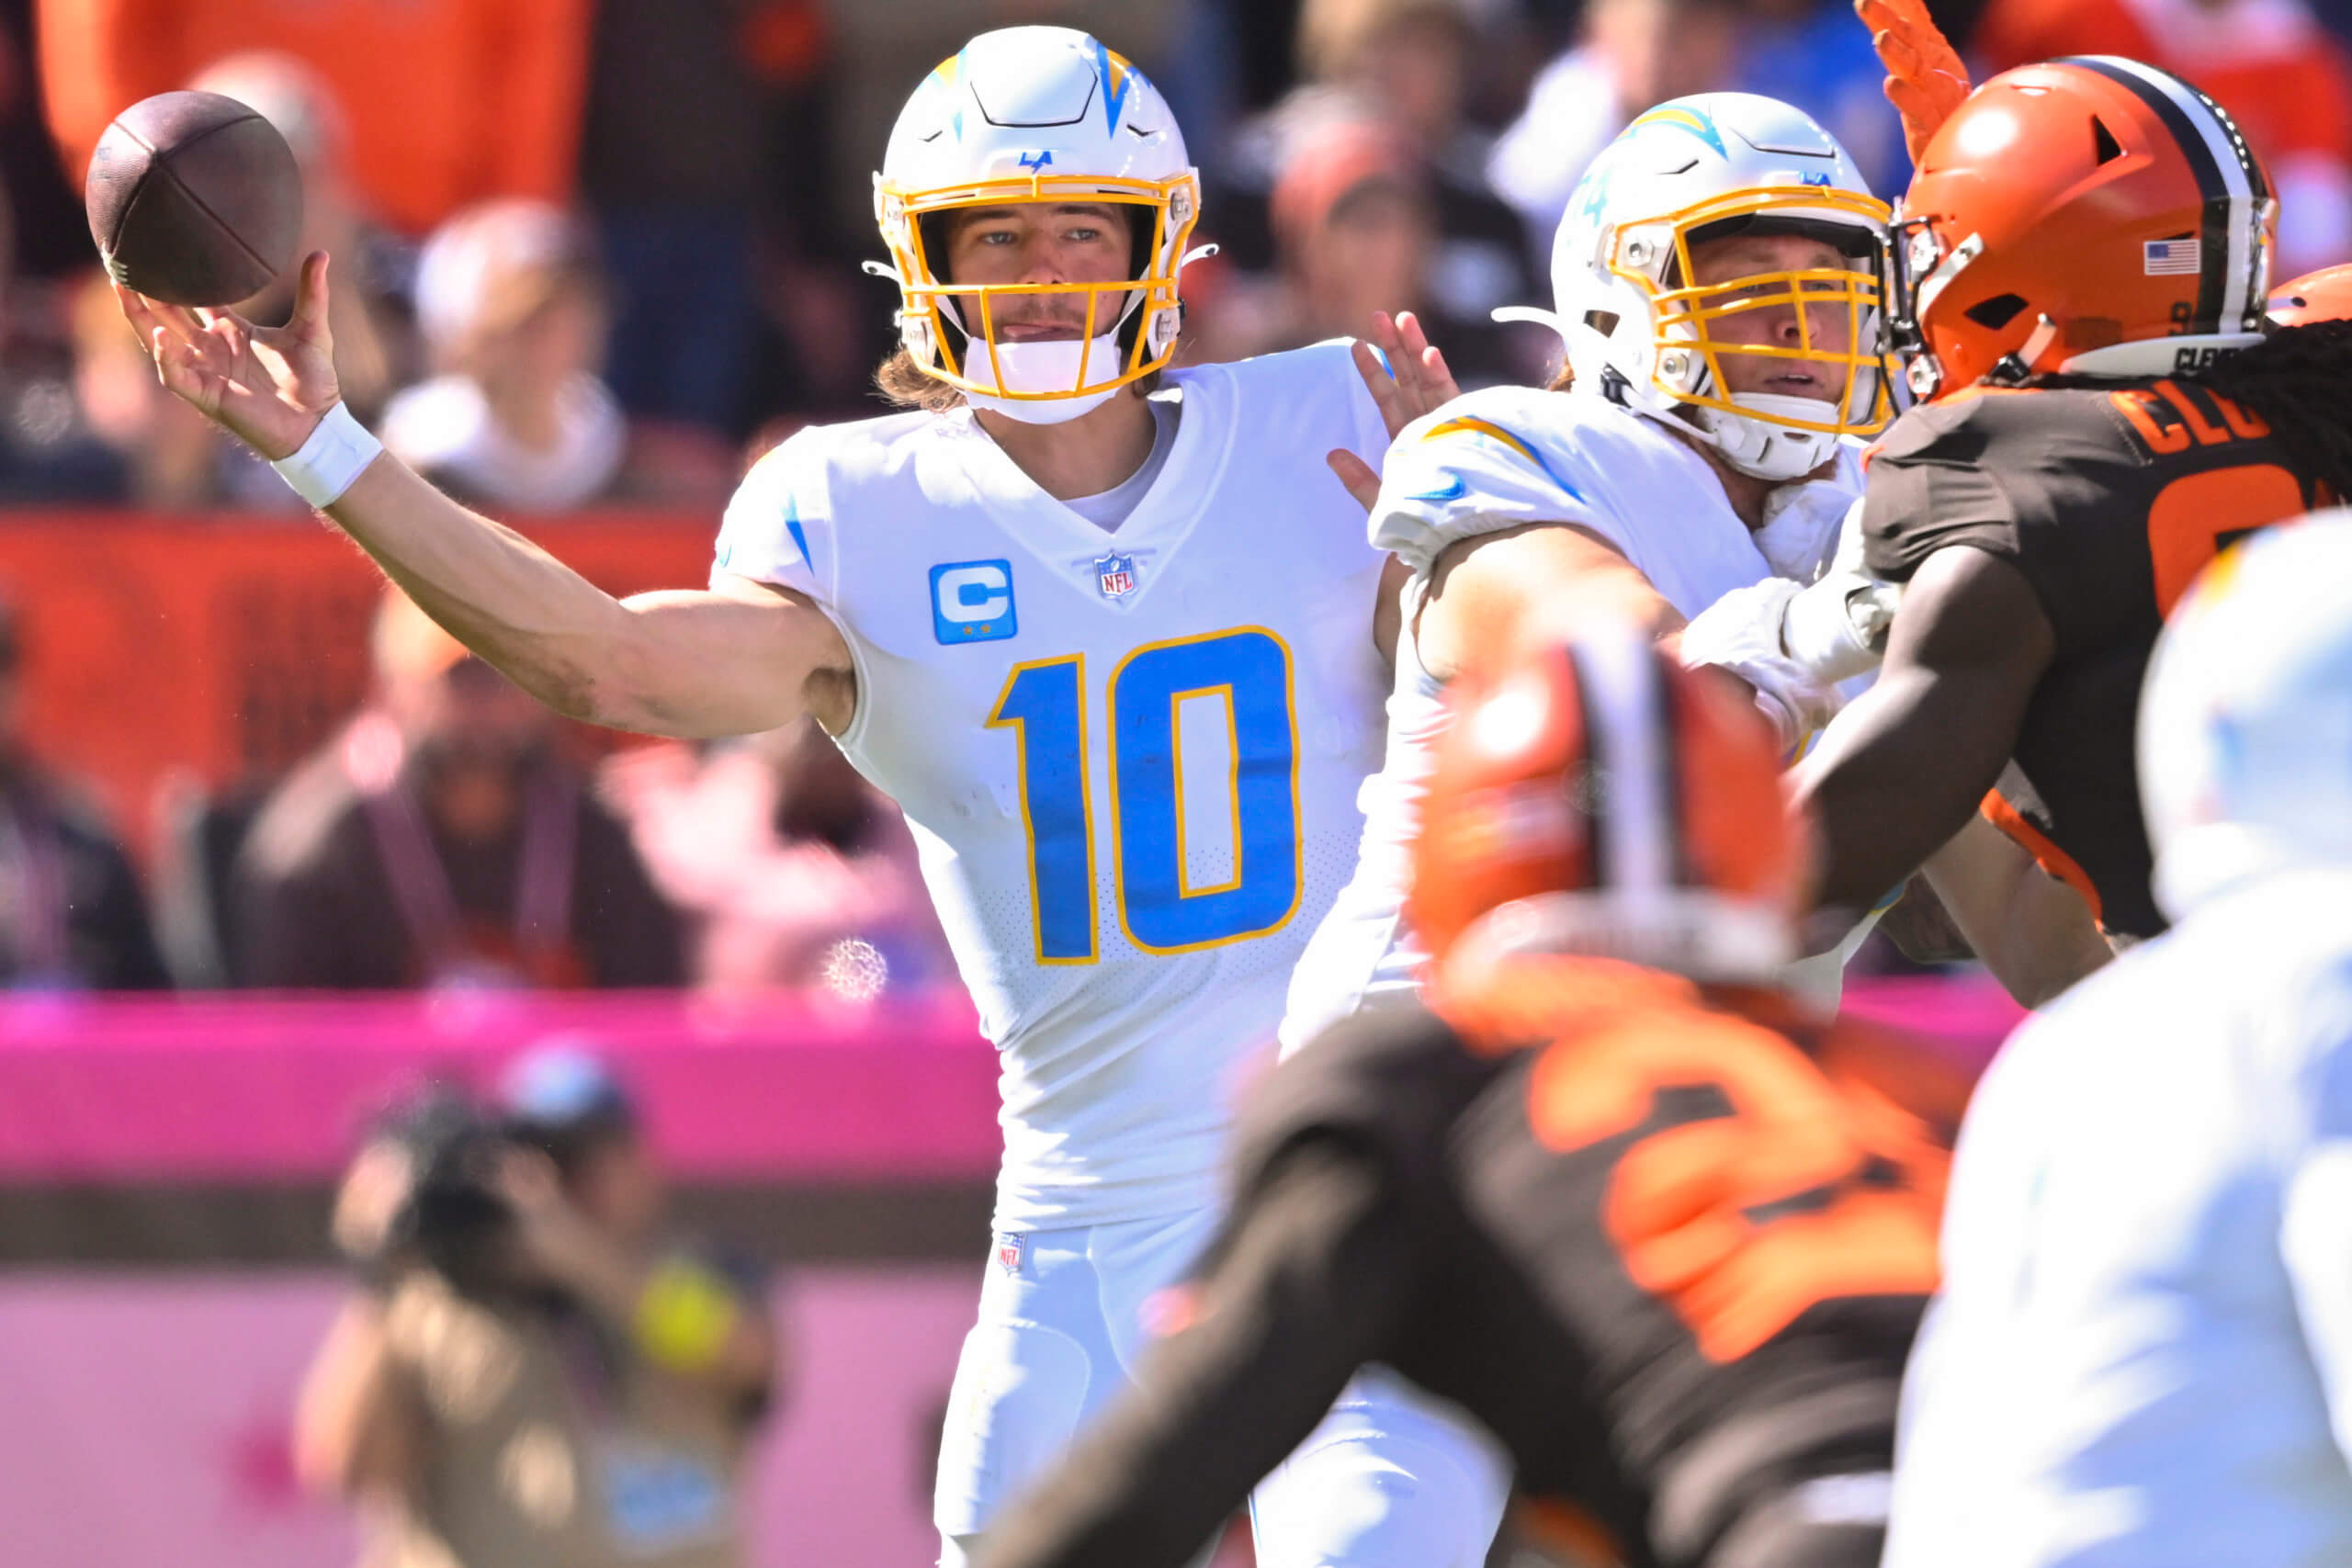 Chargers vs. Colts picks: Breaking down Week 16 Monday Night